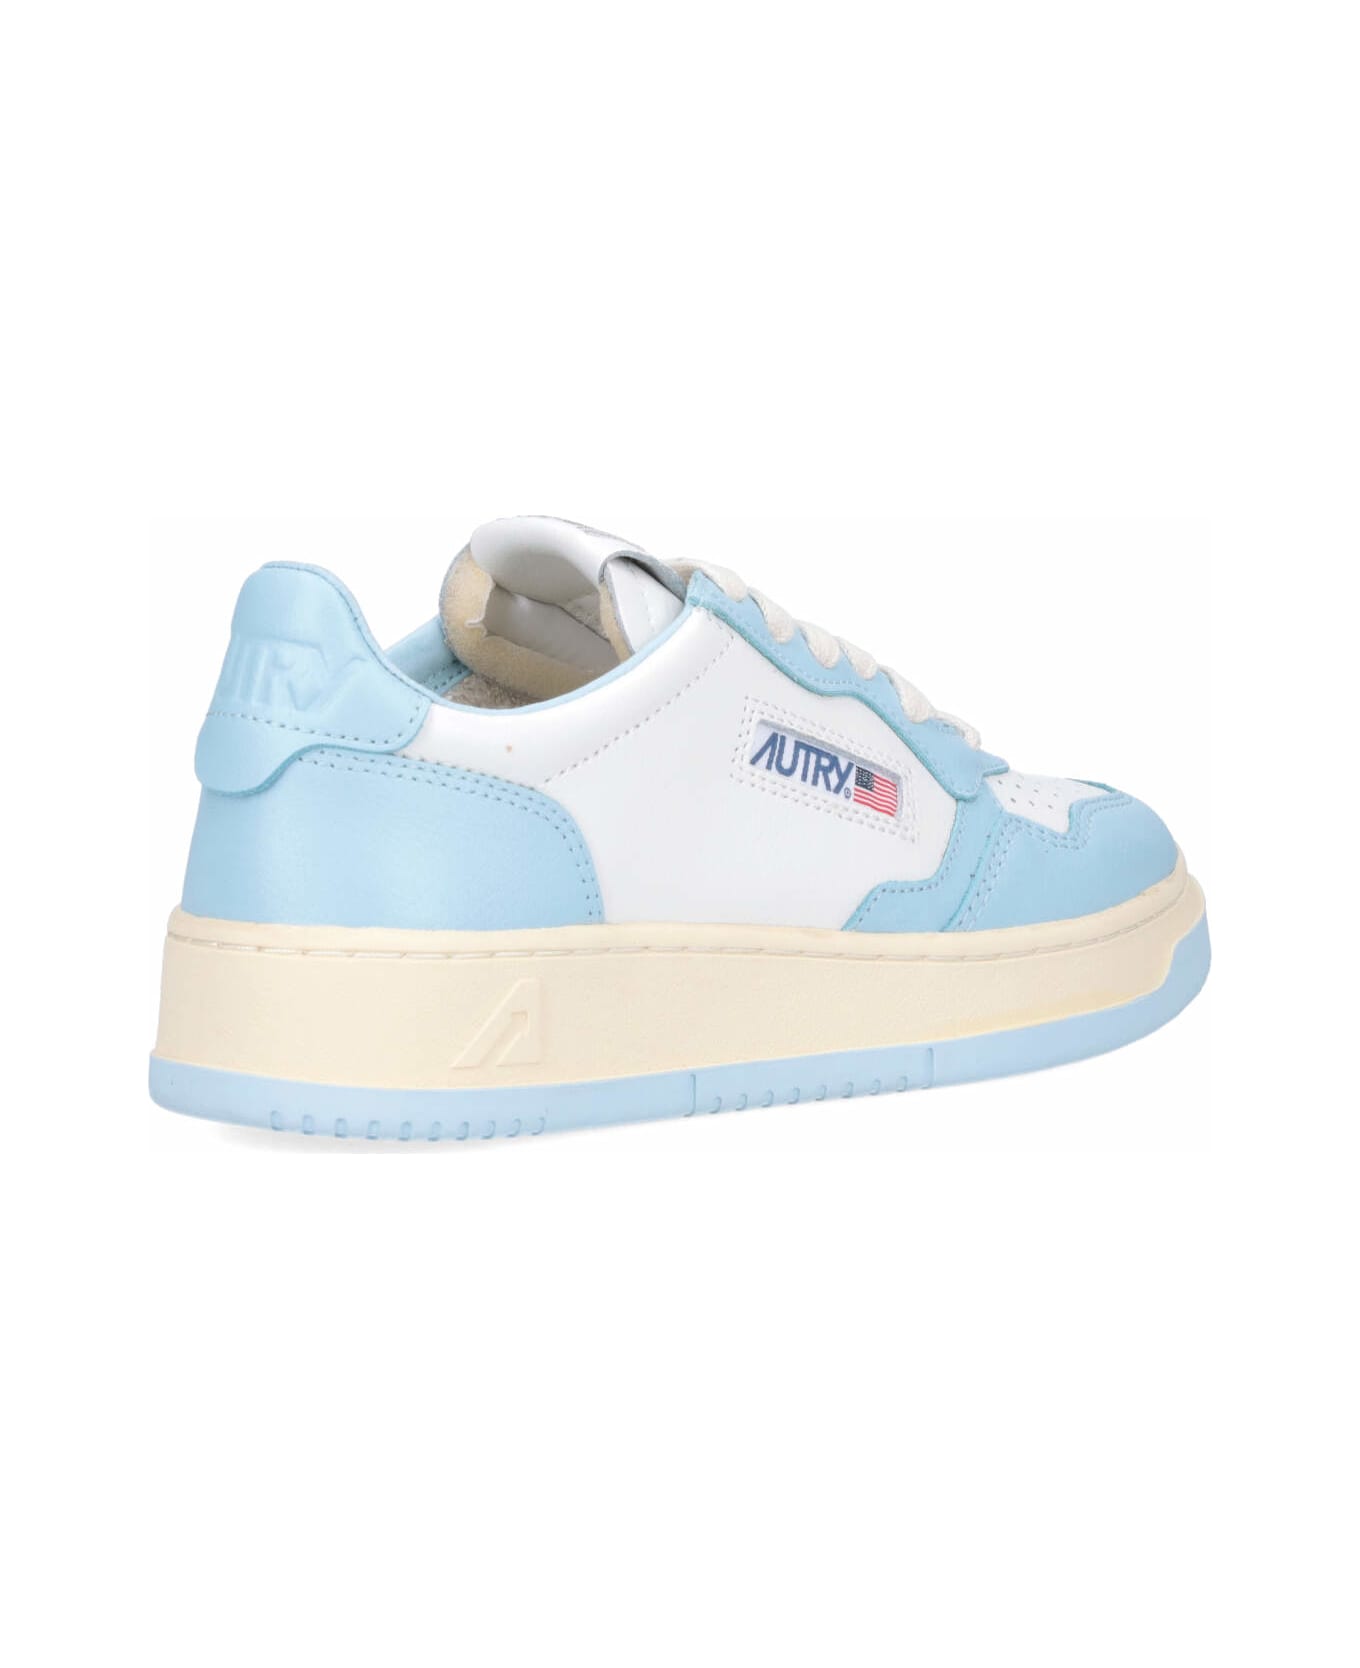 Autry Low "medalist" Sneakers - Light Blue スニーカー